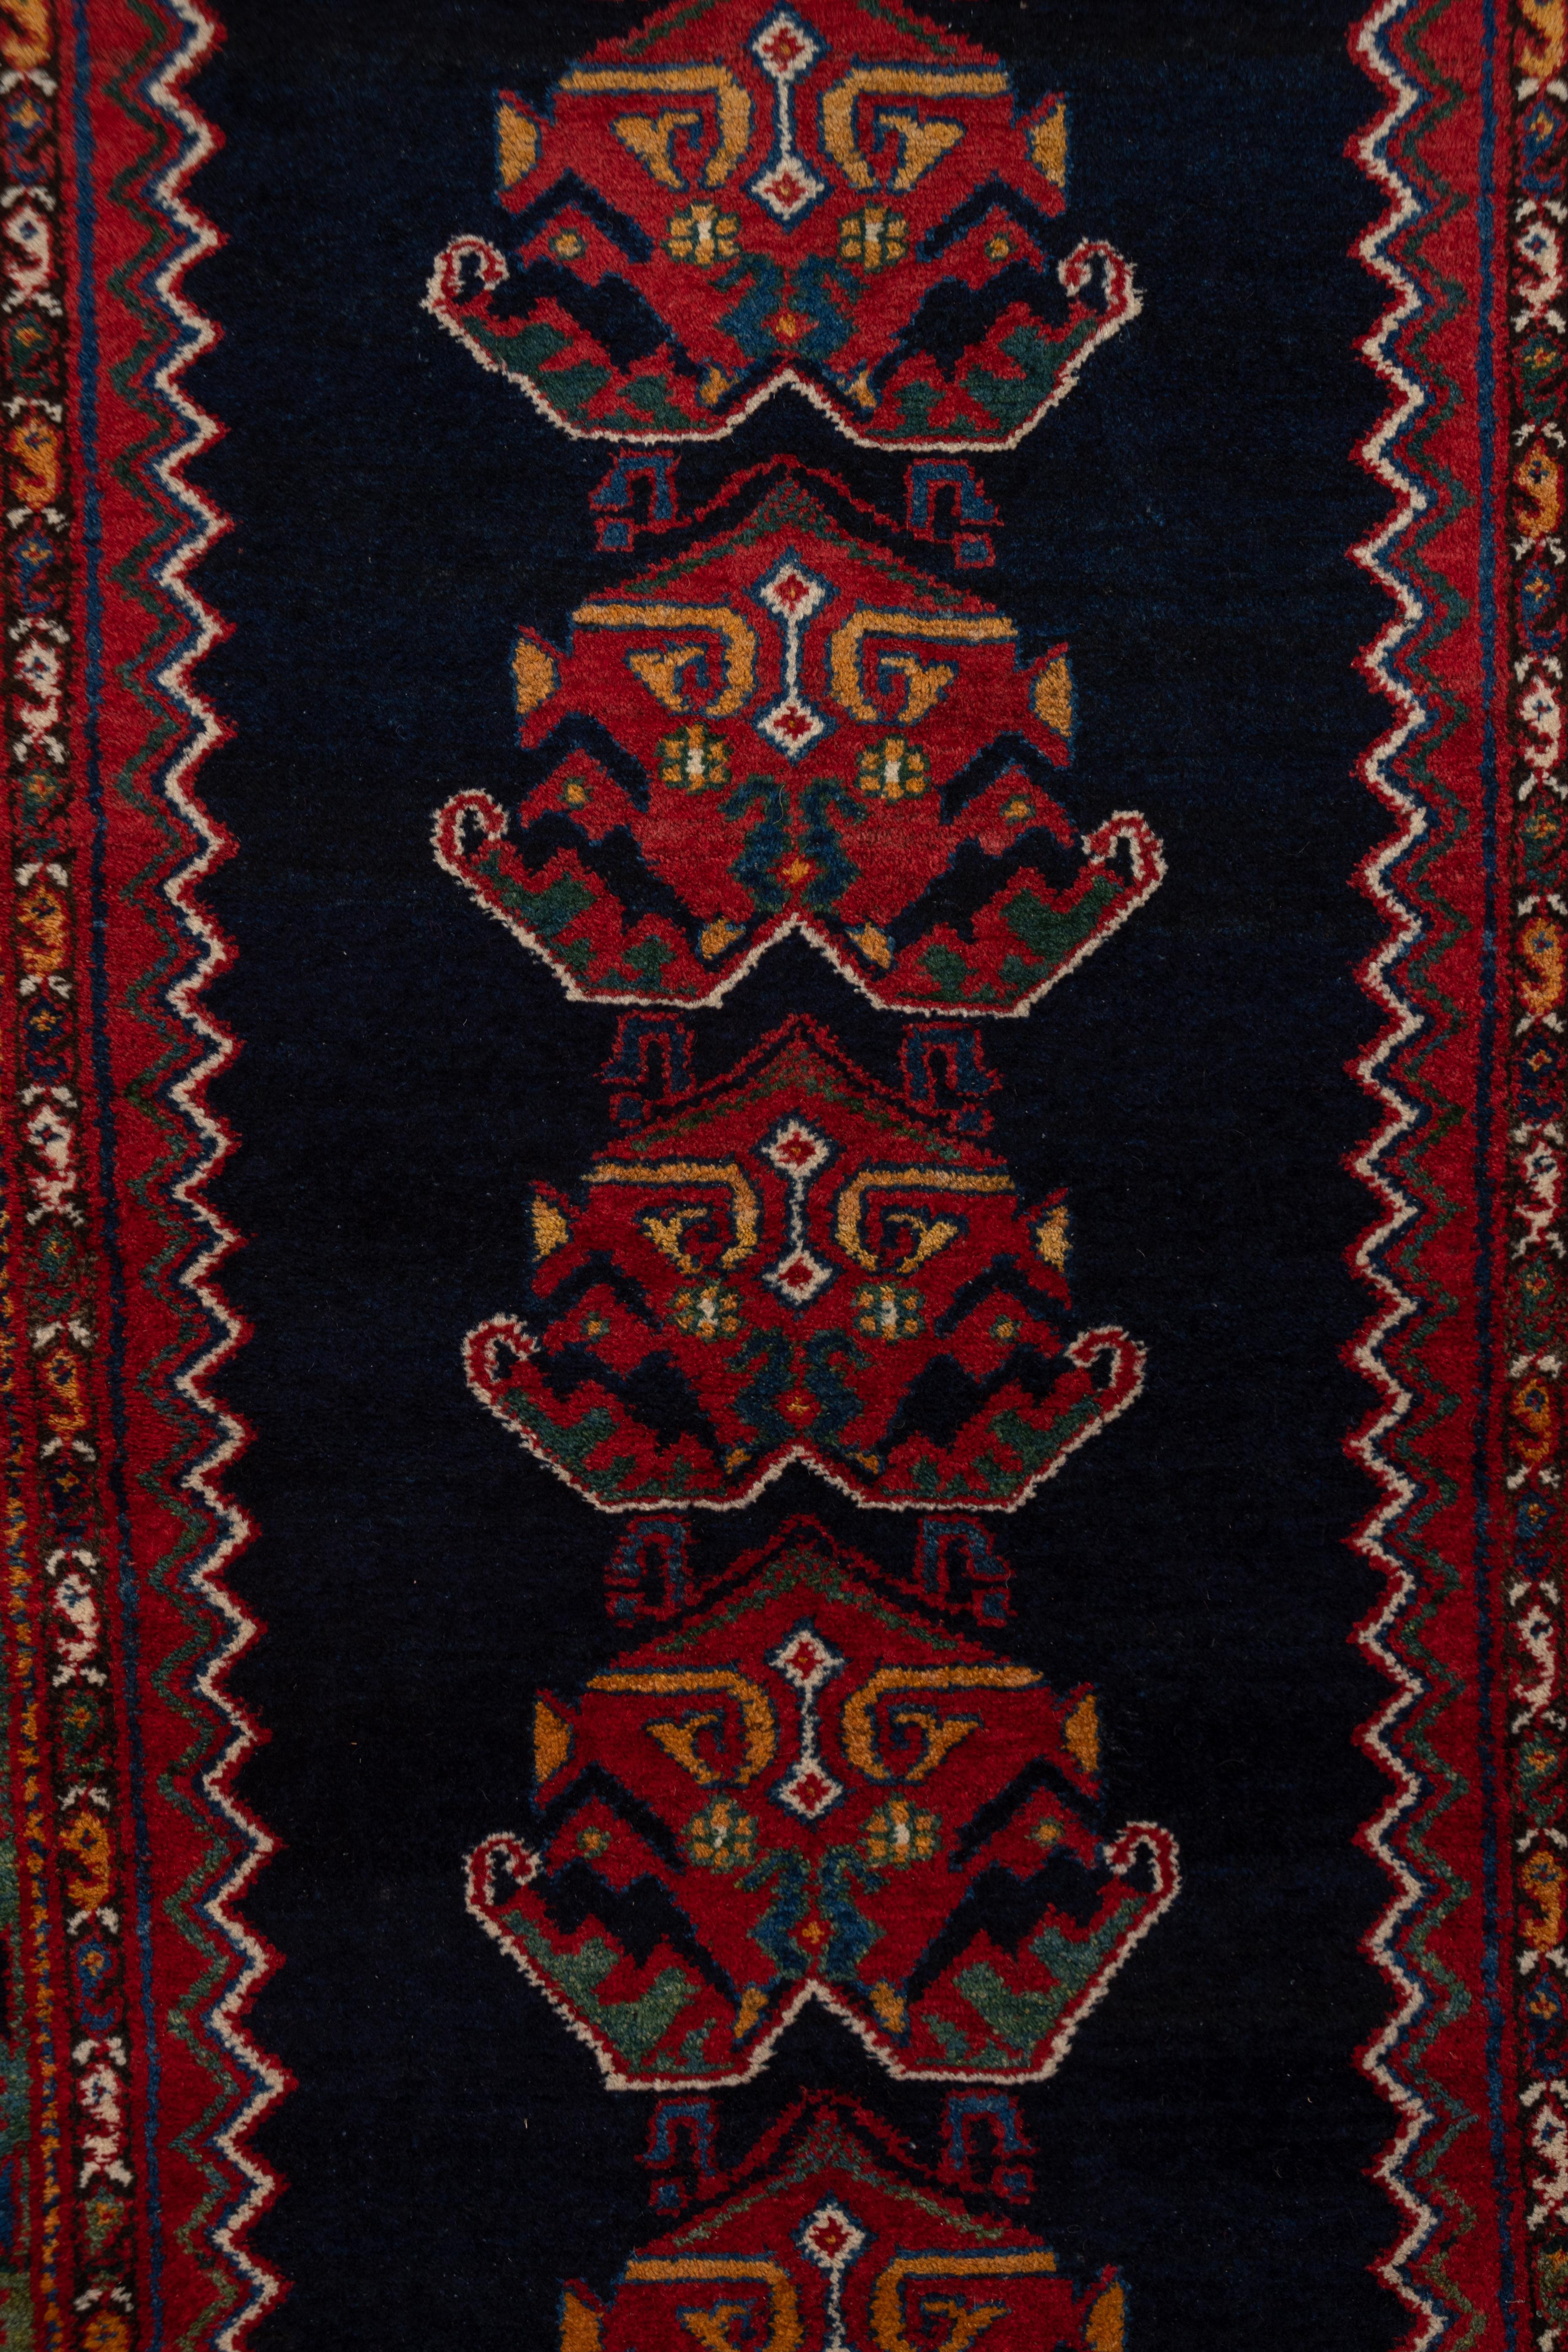 This west Persian runner displays a zig-zag edged navy otherwise plain sub field with 19 leafy palmettes, on a red ground. The green main border displays small ashik medallions between botteh chain guards.